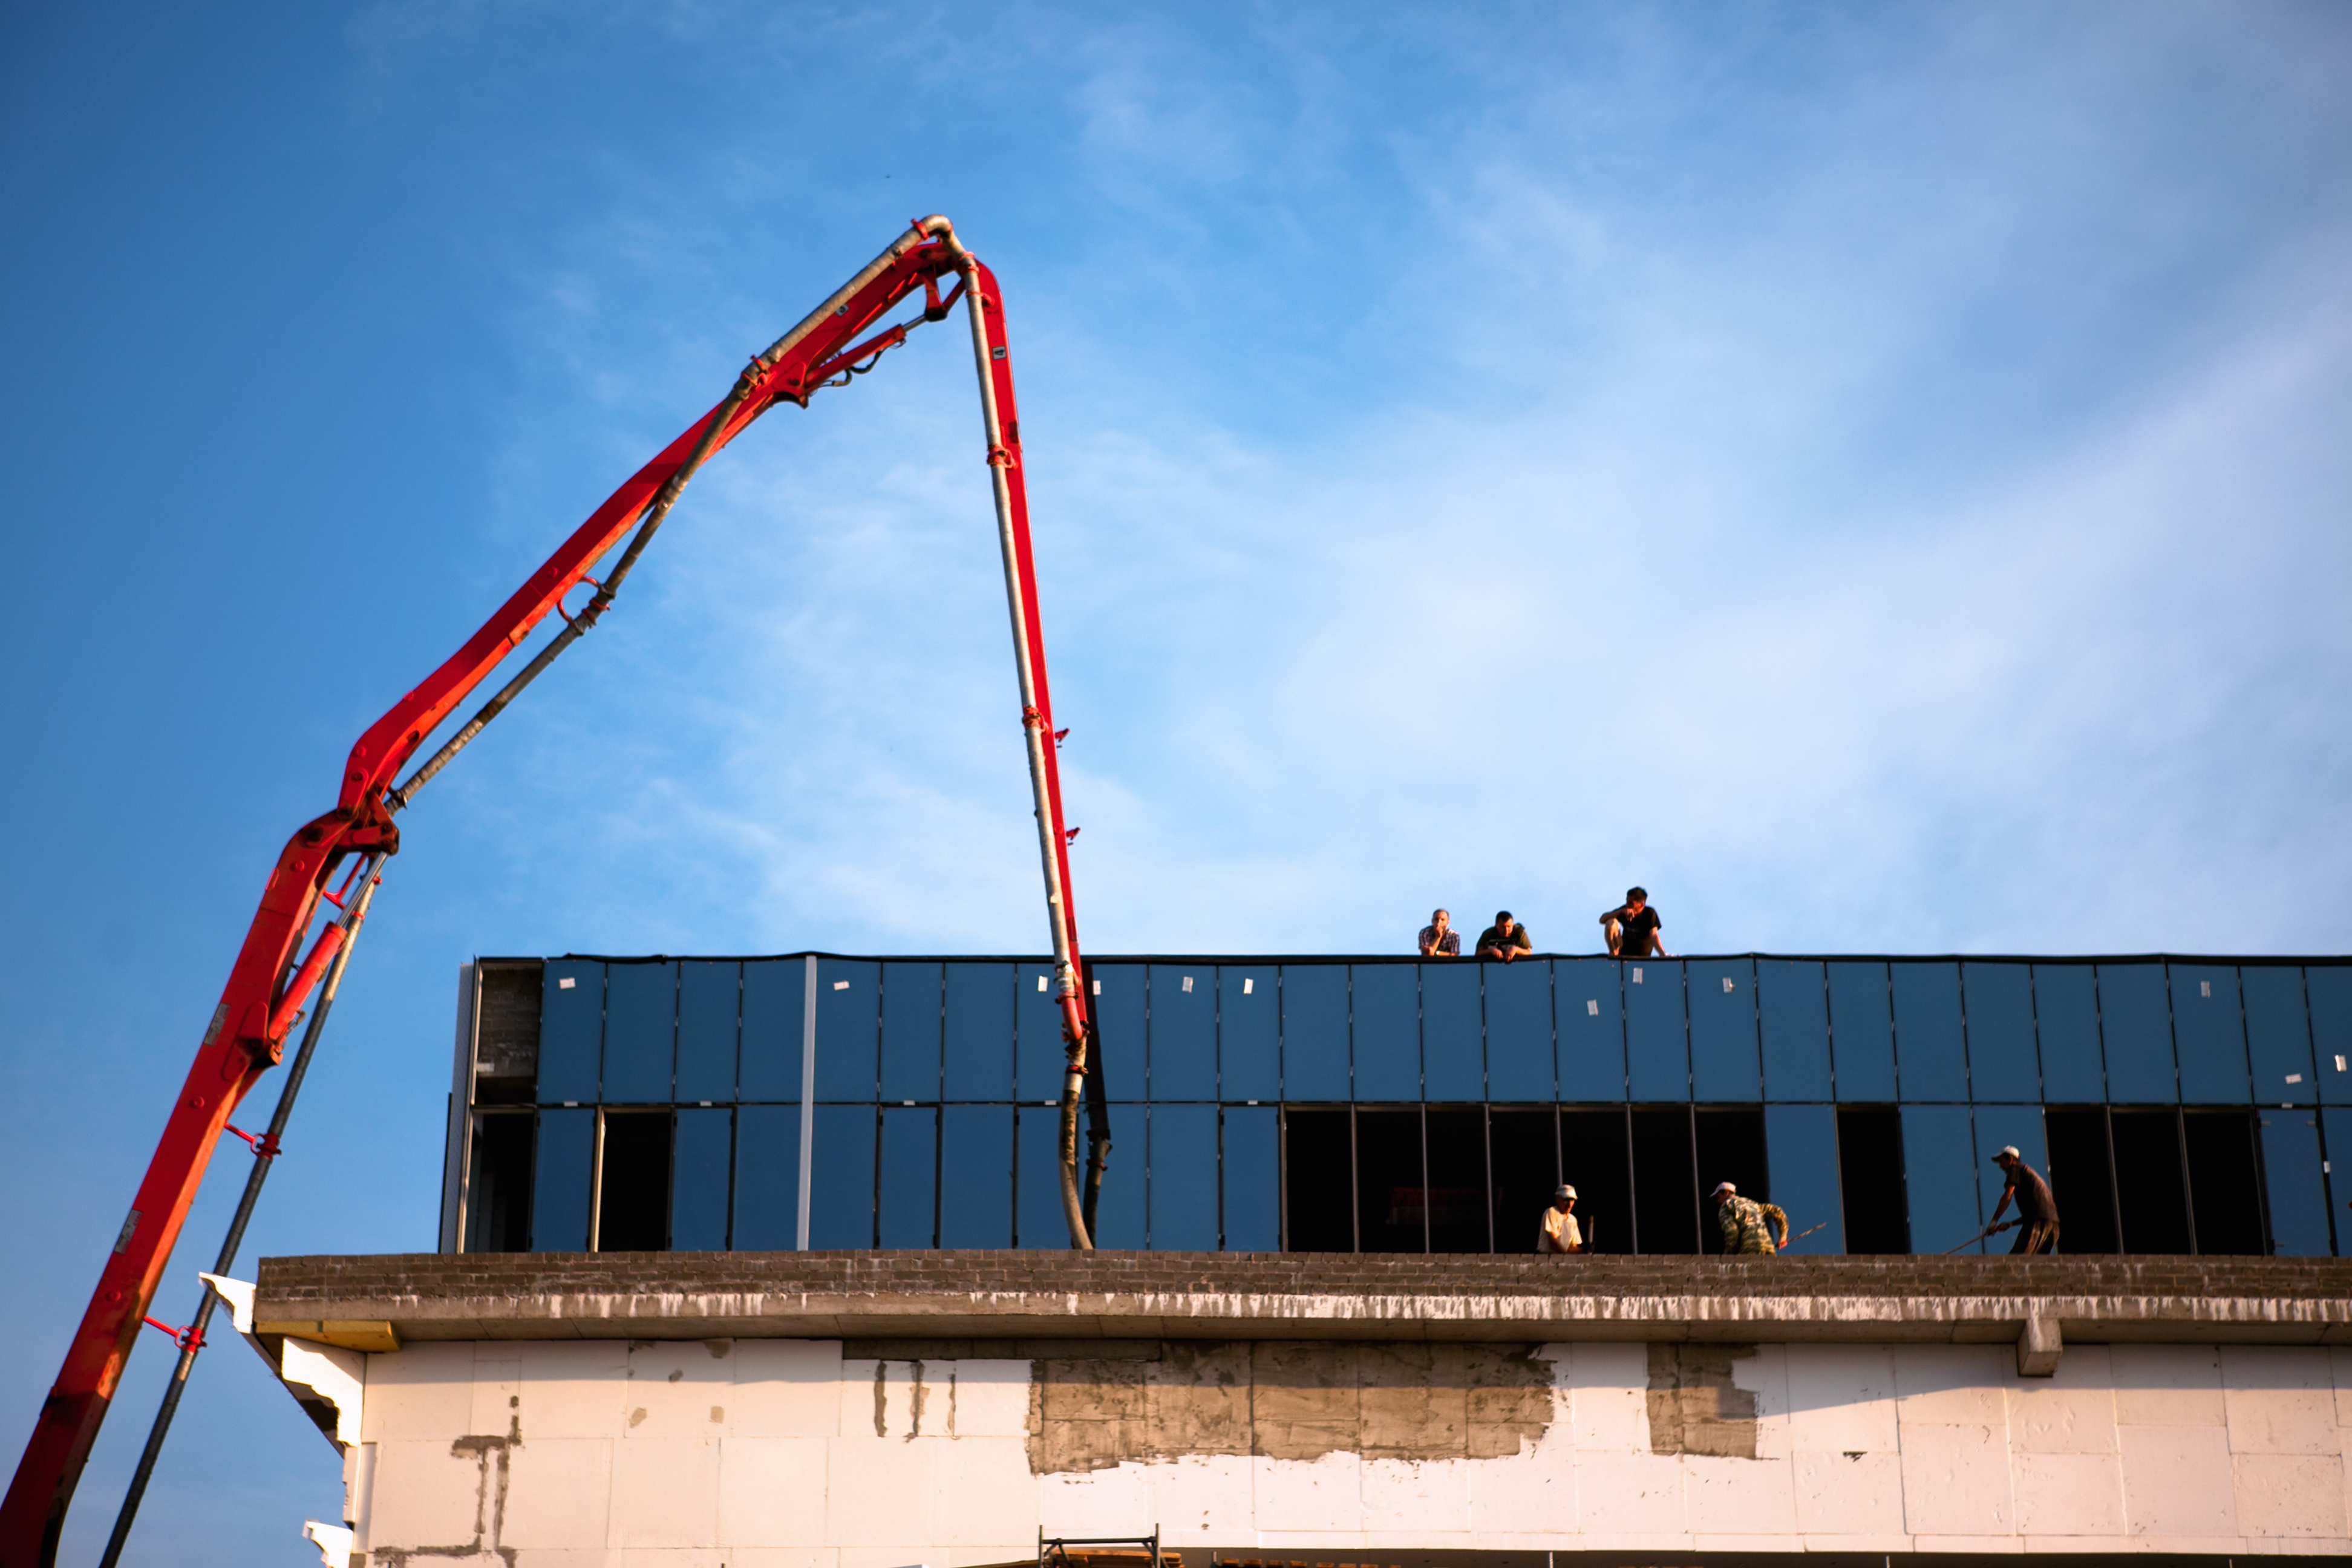 Workers on the construction site, Architectures, Offices, Industry, Labor, HQ Photo